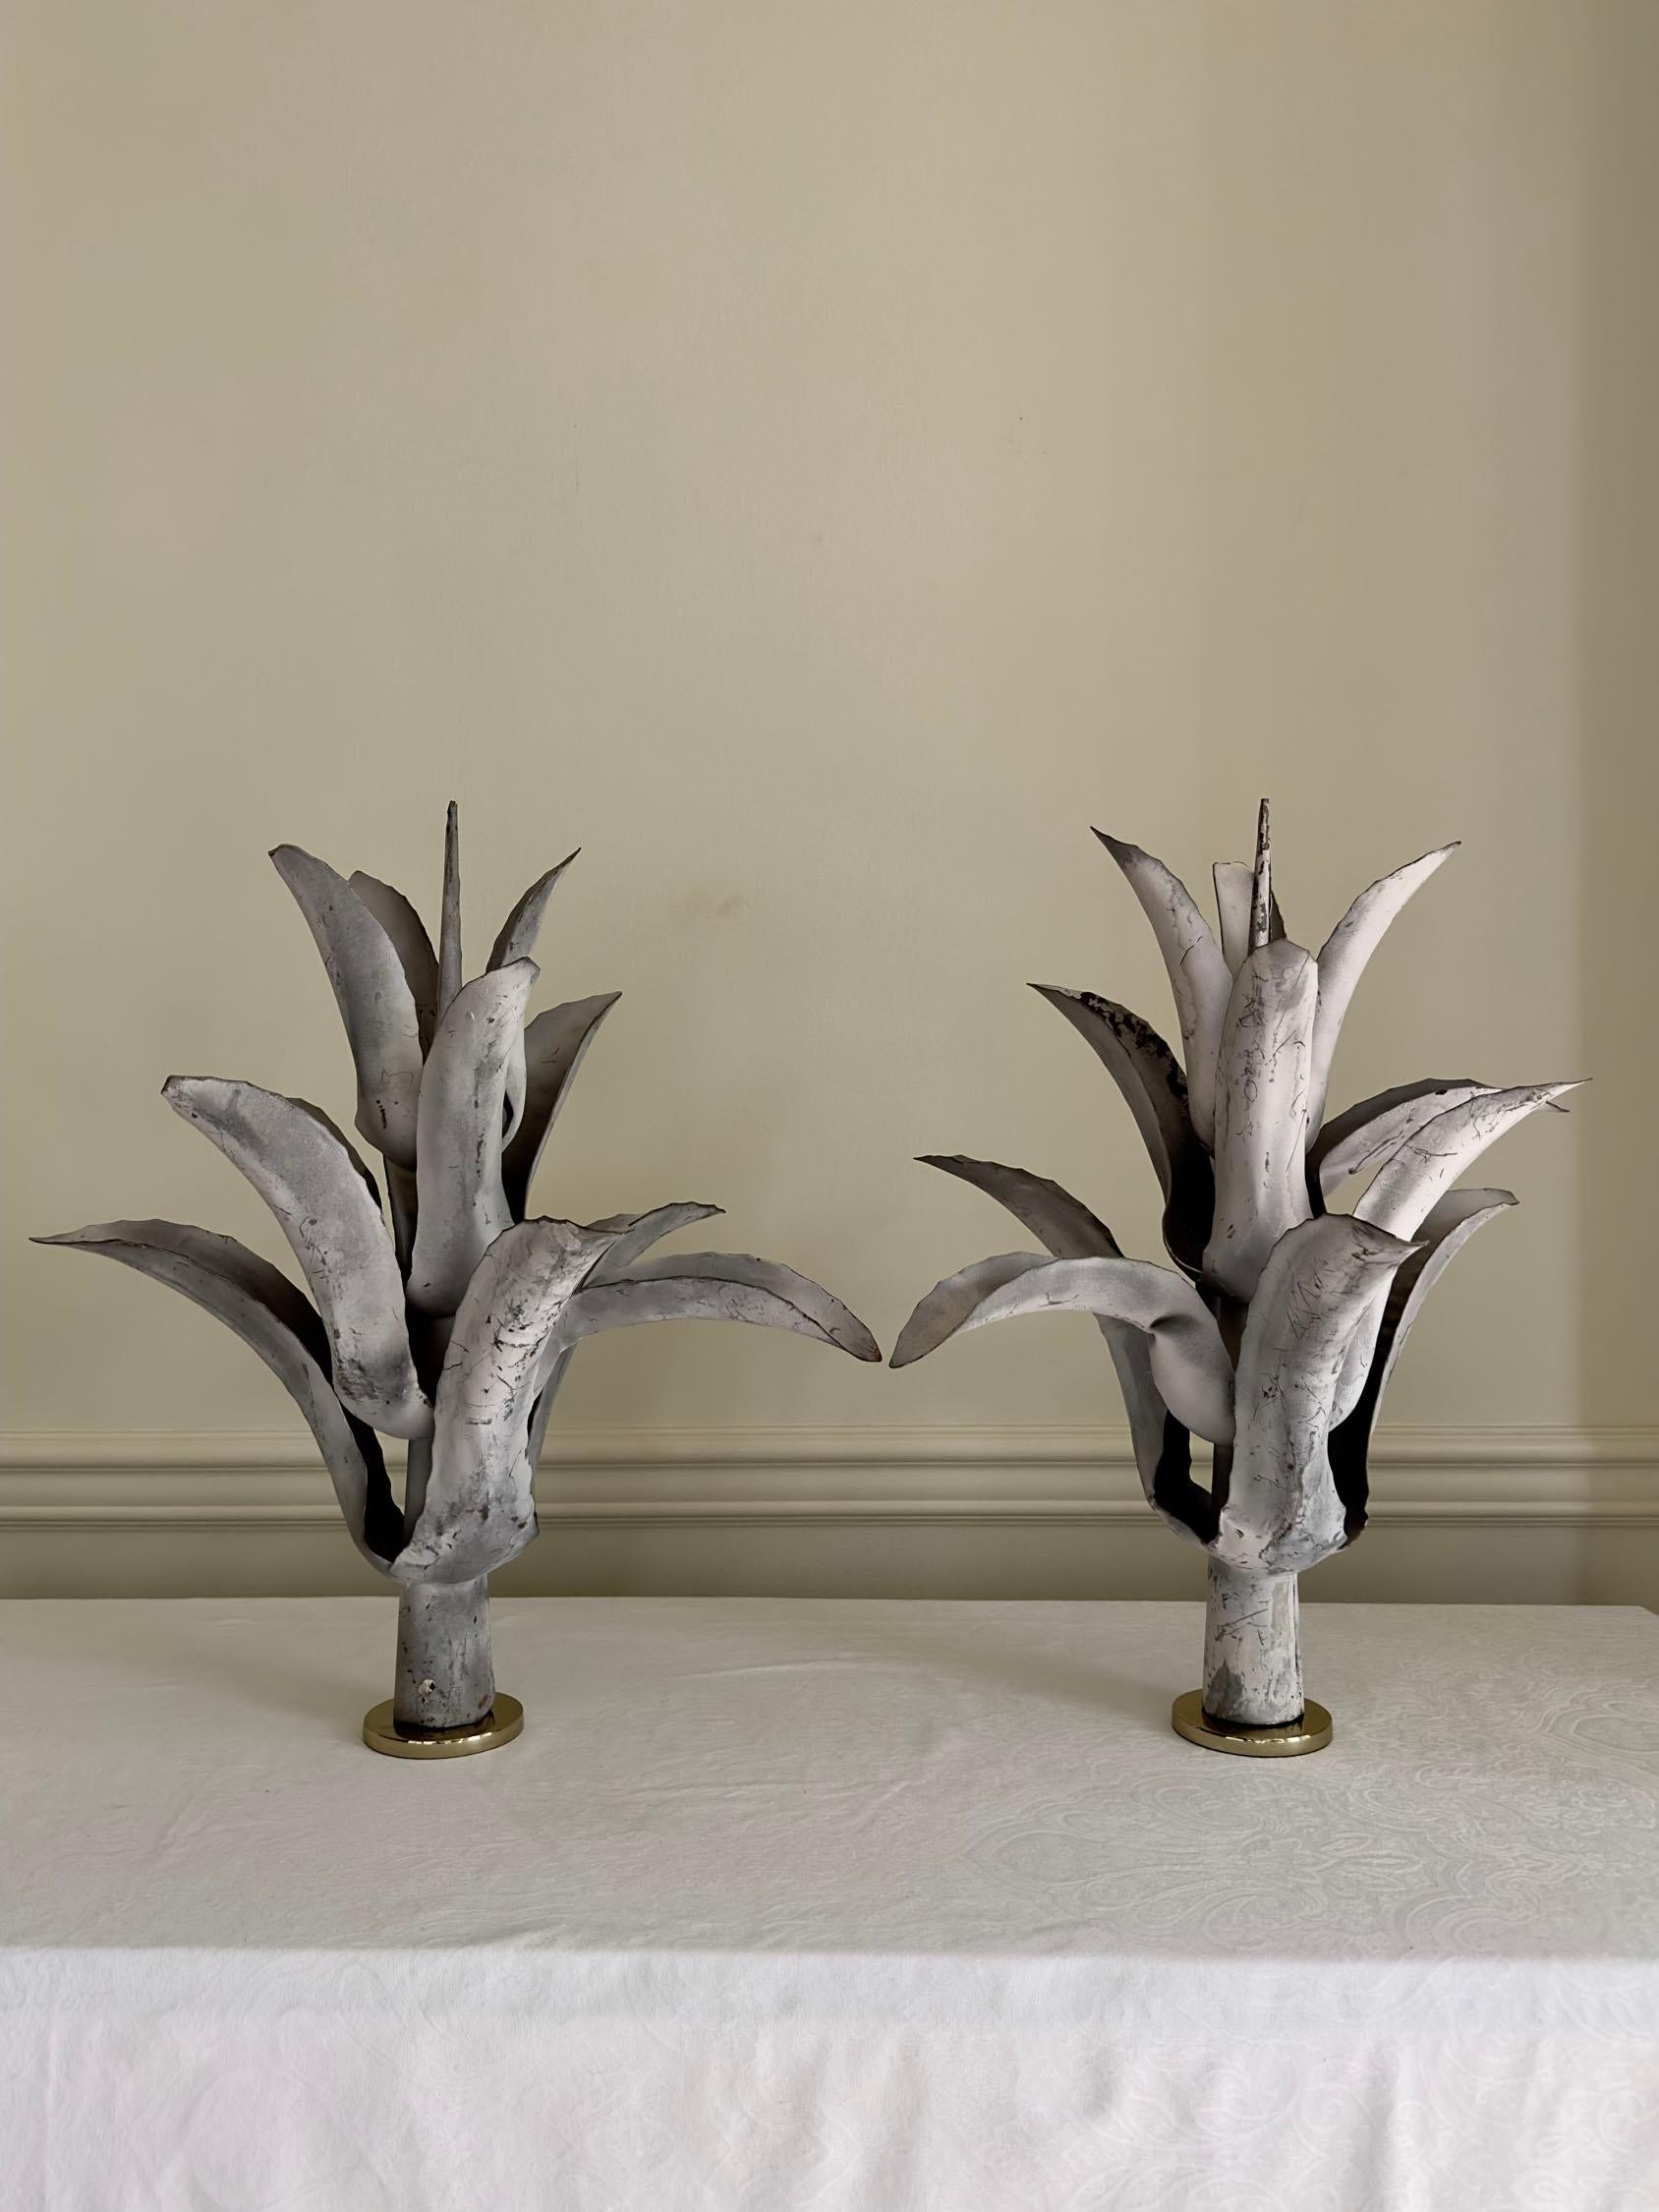 Mid-century French zinc sculptures on removable stands. Could be displayed inside or out. Incredibly chic on top of a large armoire or console. 
Also charming in an urn or terracotta pot.

In vintage condition with lovely patina and wear consistent